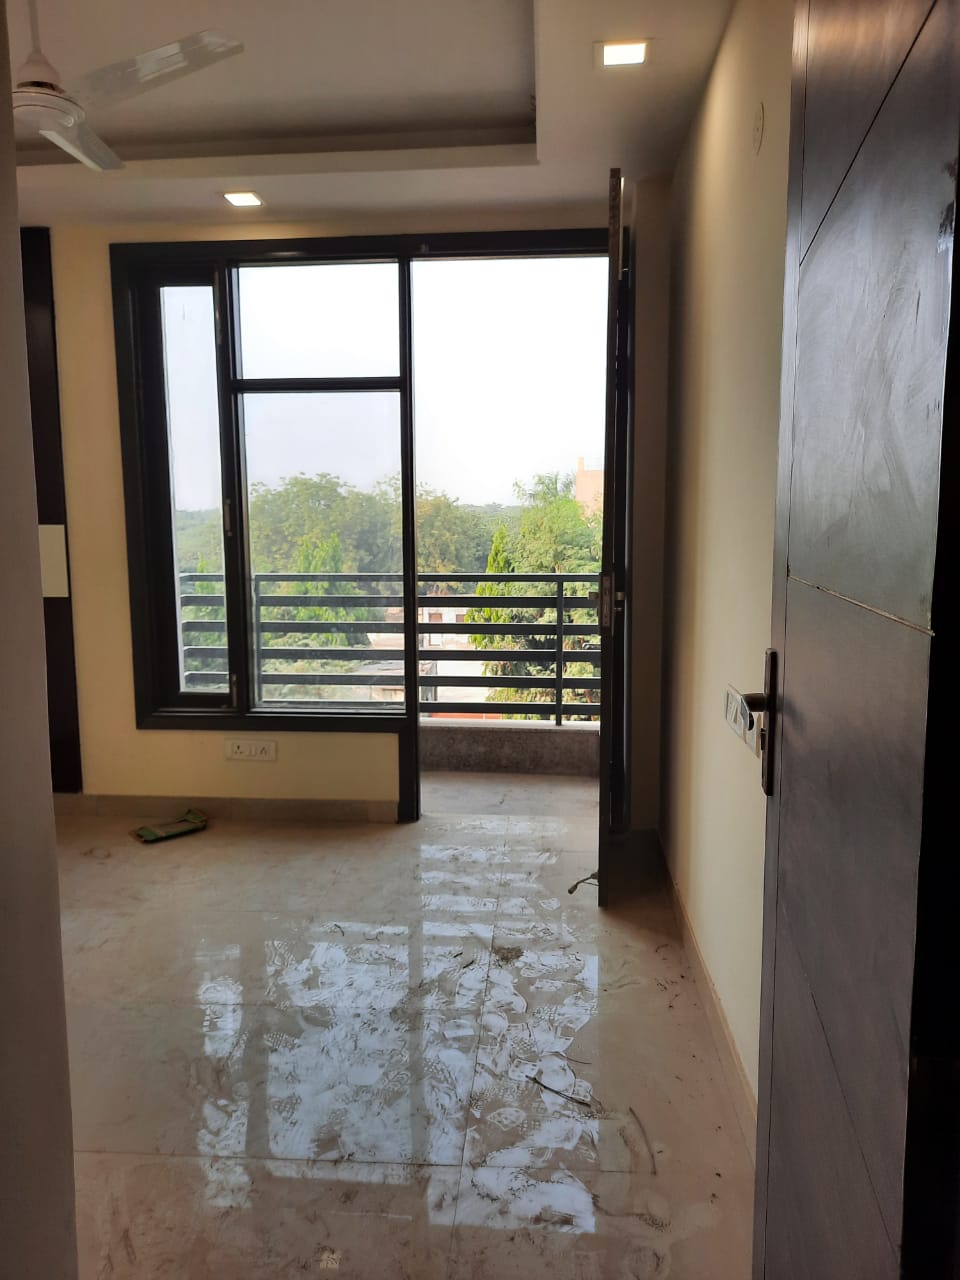 2/3/4 BHK Flats For Sale/Rent in Chattarpur